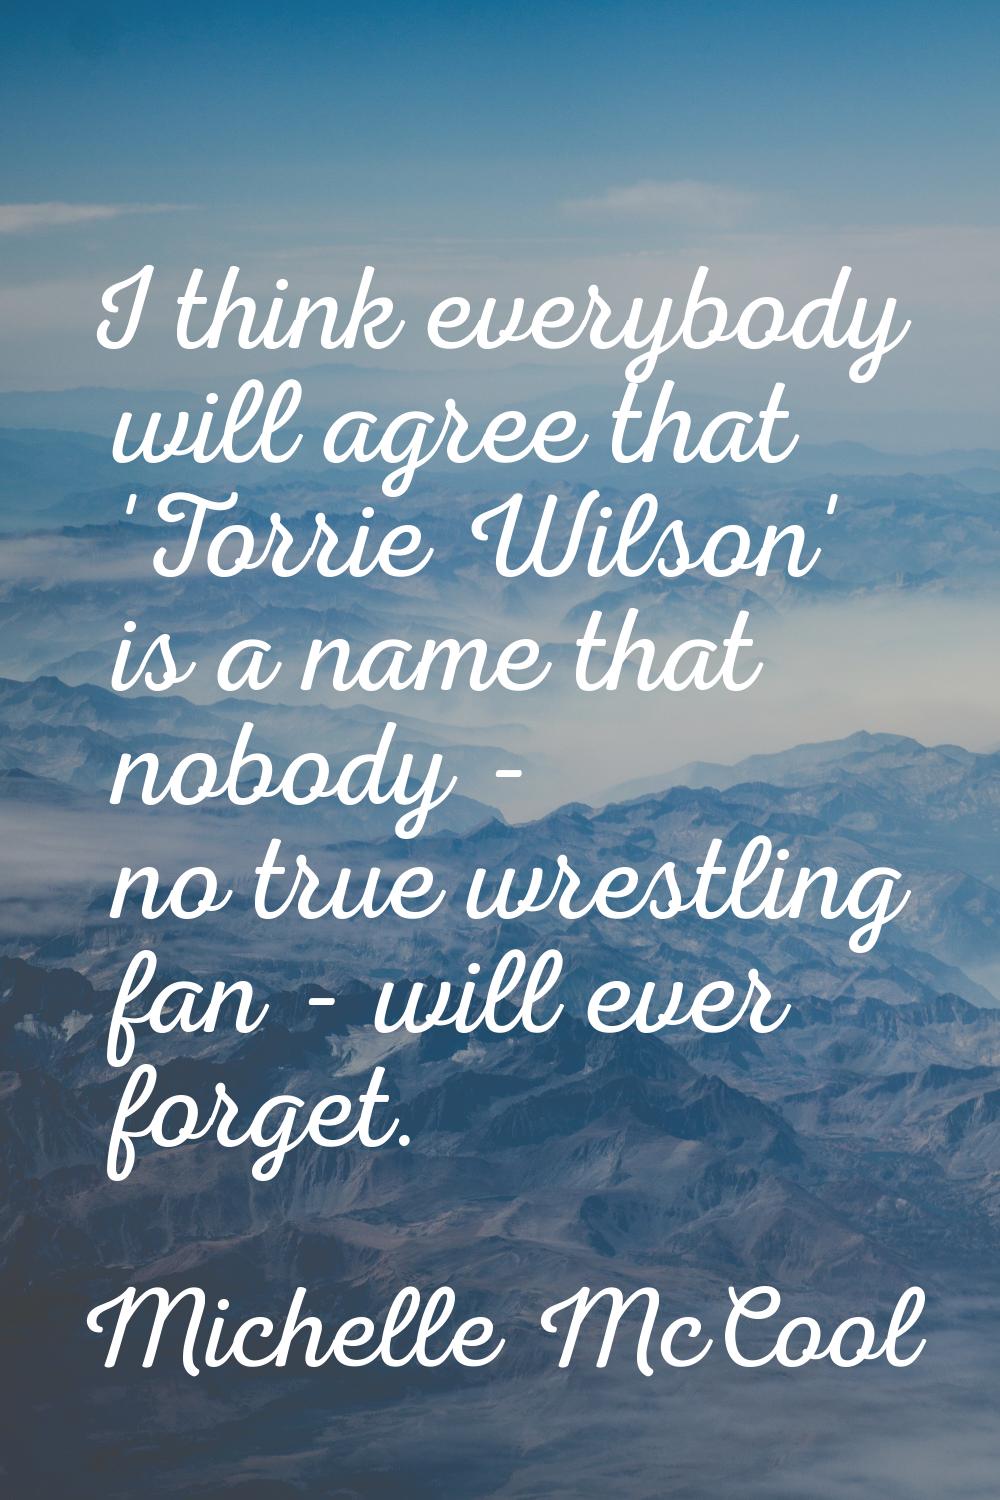 I think everybody will agree that 'Torrie Wilson' is a name that nobody - no true wrestling fan - w